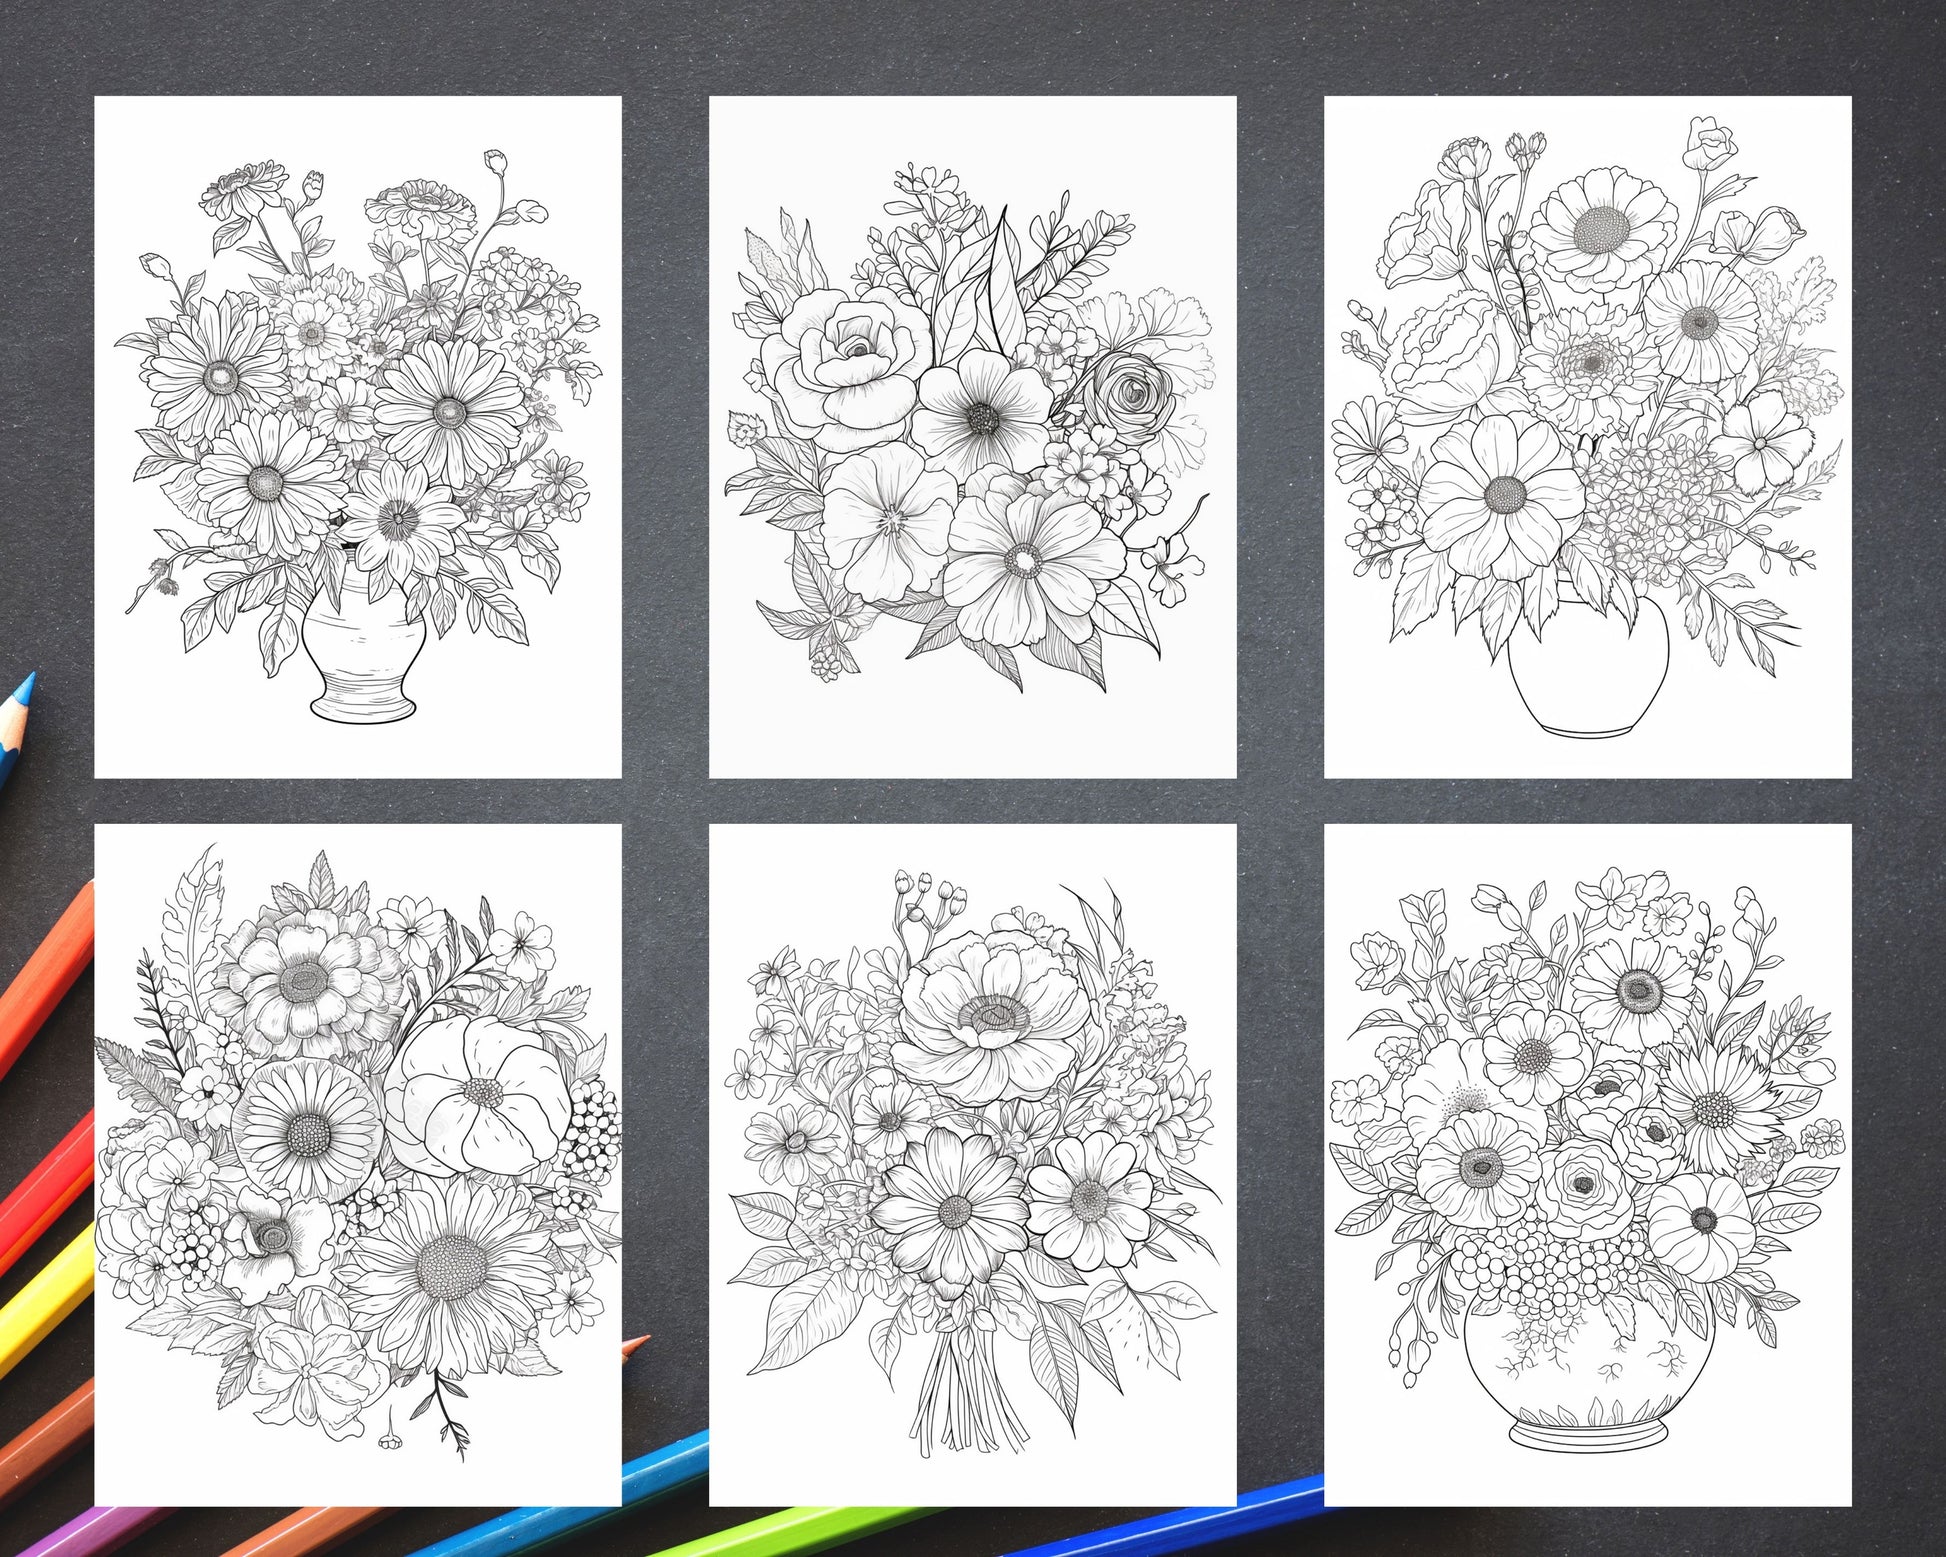 100 Printable Flower Vase Coloring Pages for Adults, Floral Grayscale Coloring Book, Printable PDF File Download - raspiee